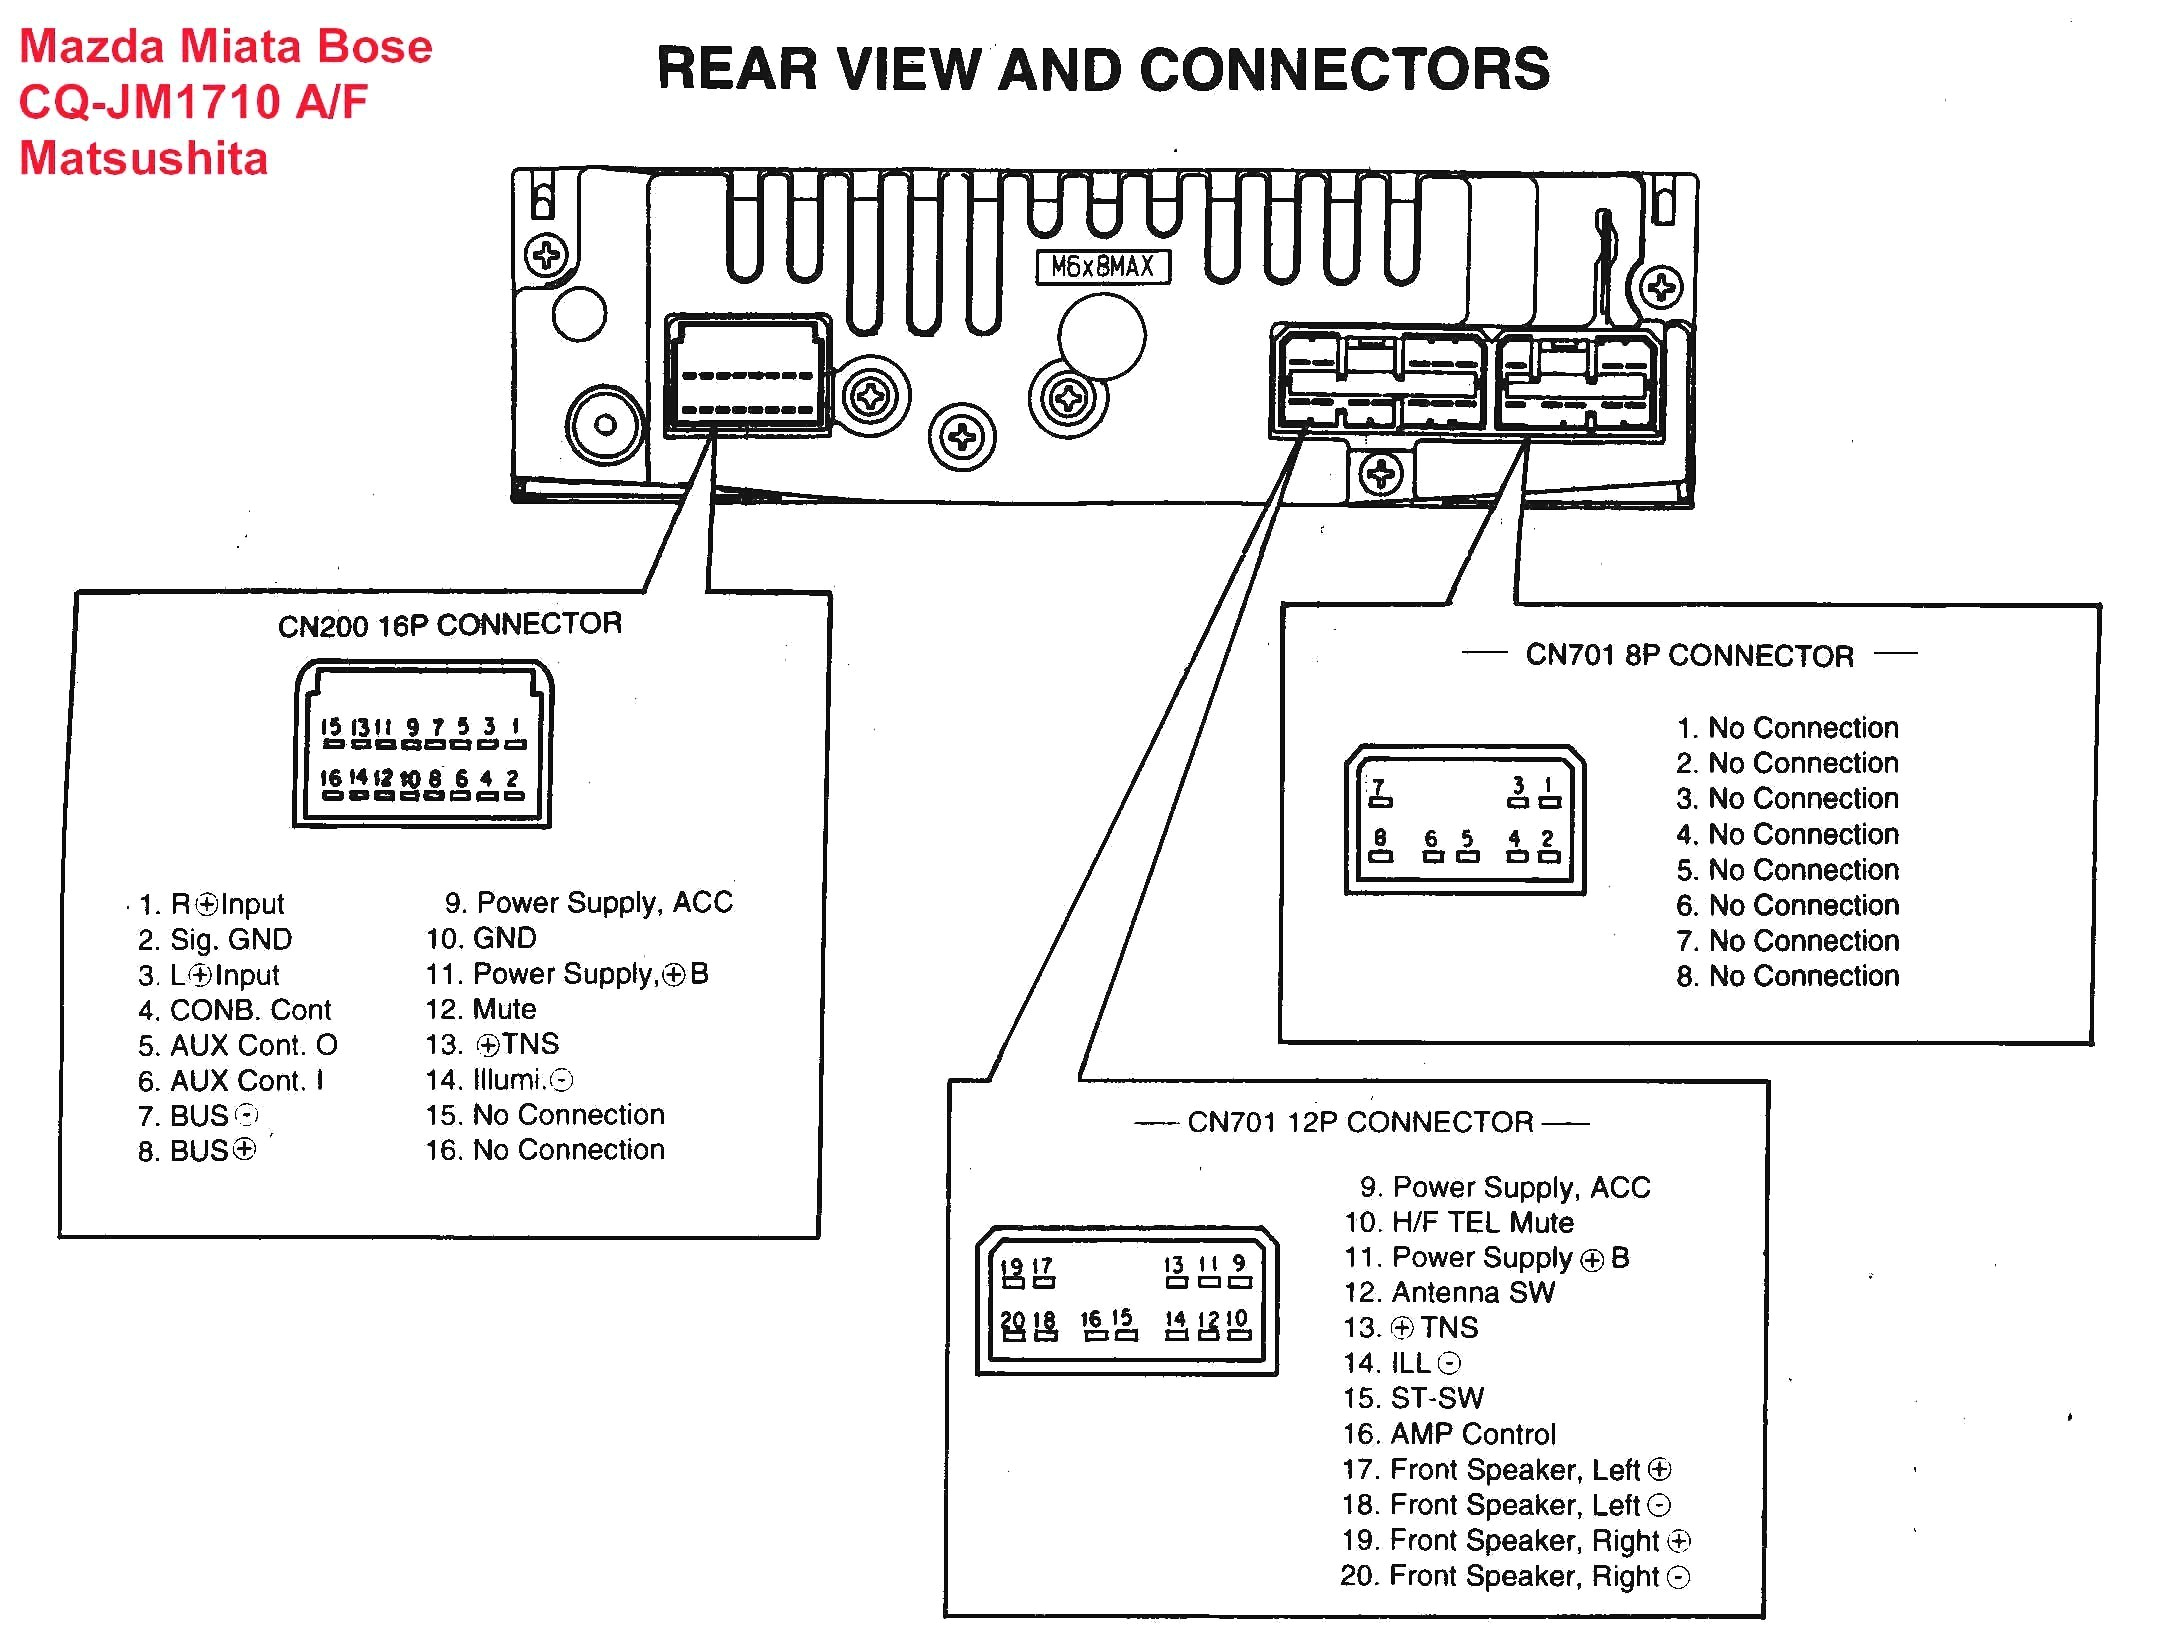 wiring diagram also pioneer deh wiring harness diagram wiring pioneer deh 16 wiring harness wiring diagram